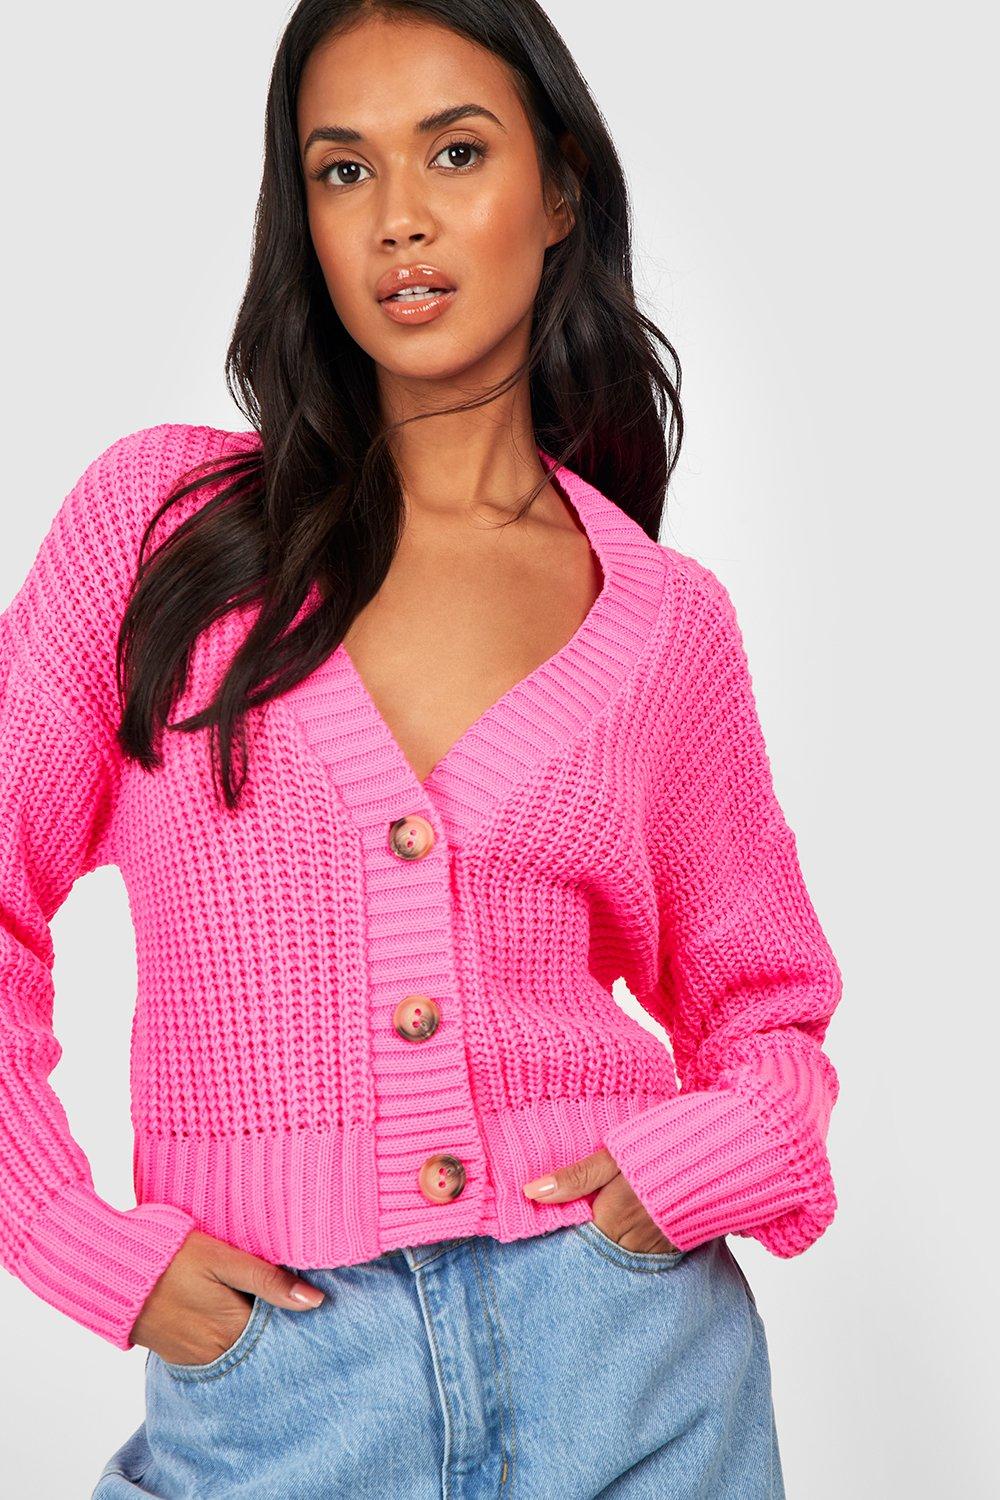 80s Sweatshirts, Sweaters, Vests | Women Womens Chunky Knit Cropped Cardigan - Pink - M $28.00 AT vintagedancer.com